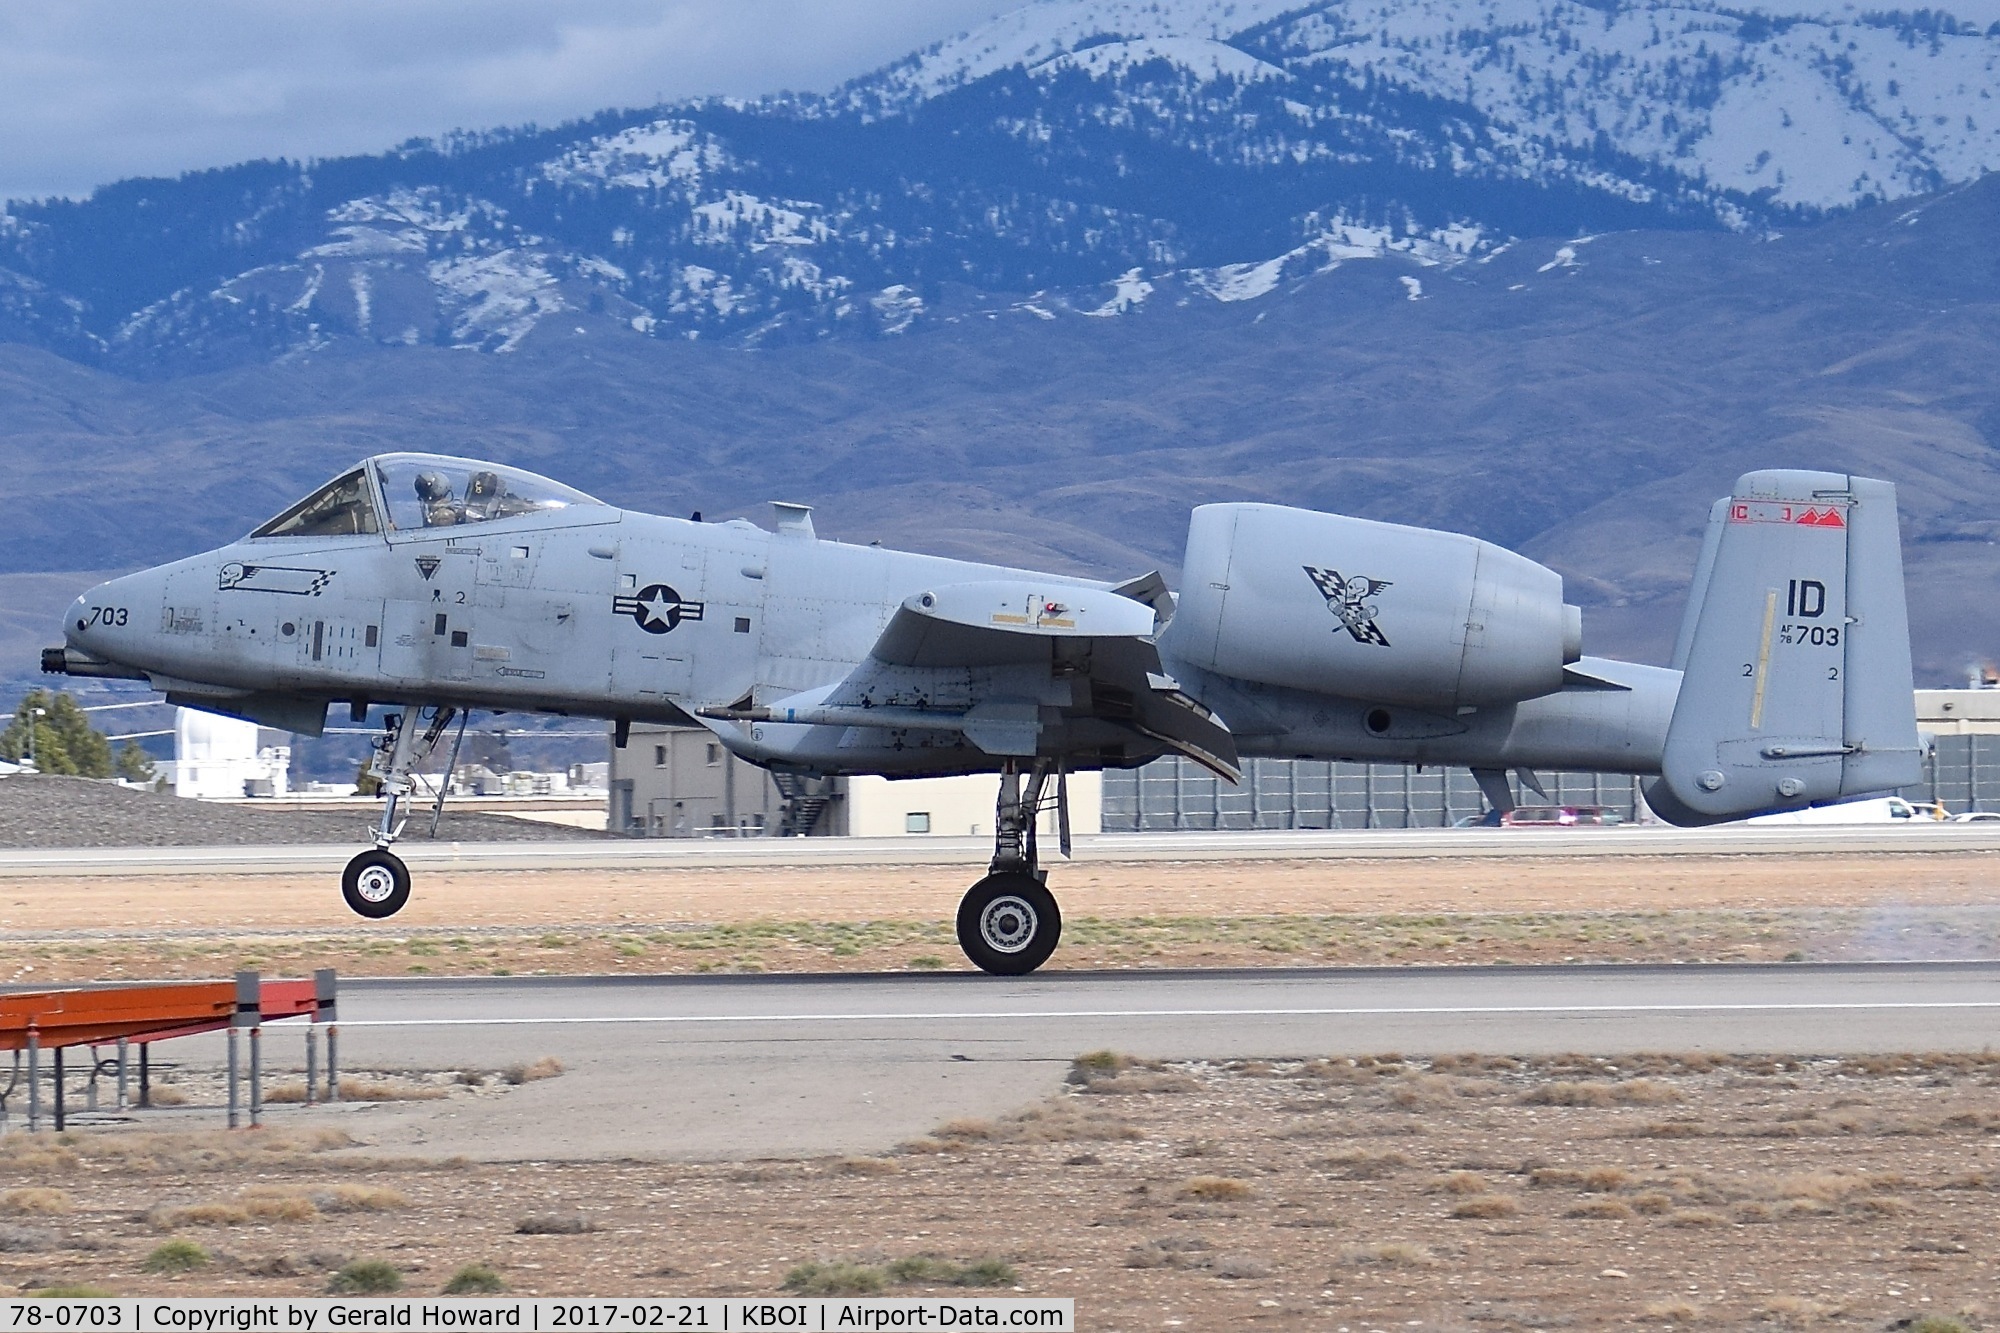 78-0703, 1978 Fairchild Republic A-10C Thunderbolt II C/N A10-0323, Landing roll out on RWY 28L.  190th Fighter Sq., 124th Fighter Wing, Idaho ANG.